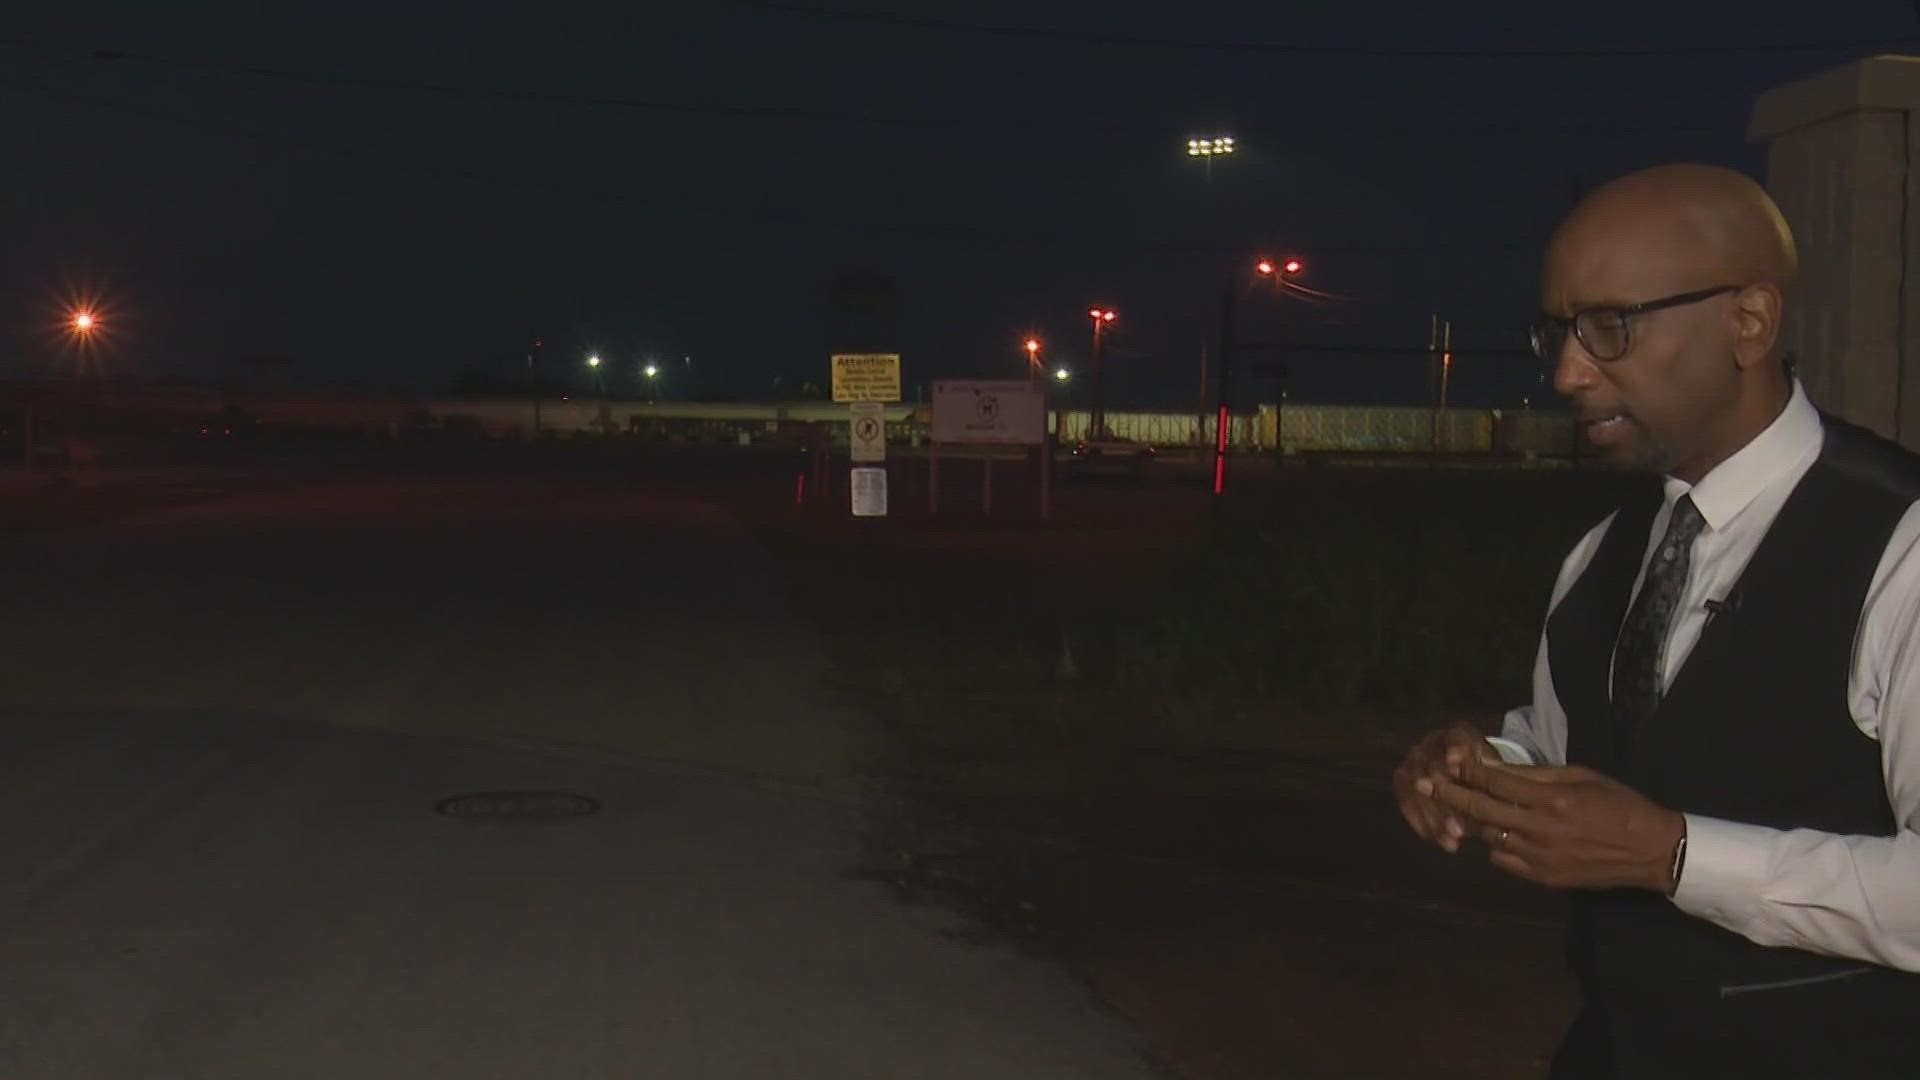 Investigators said the man was train hopping and had arrived in San Antonio via a train from Eagle Pass.